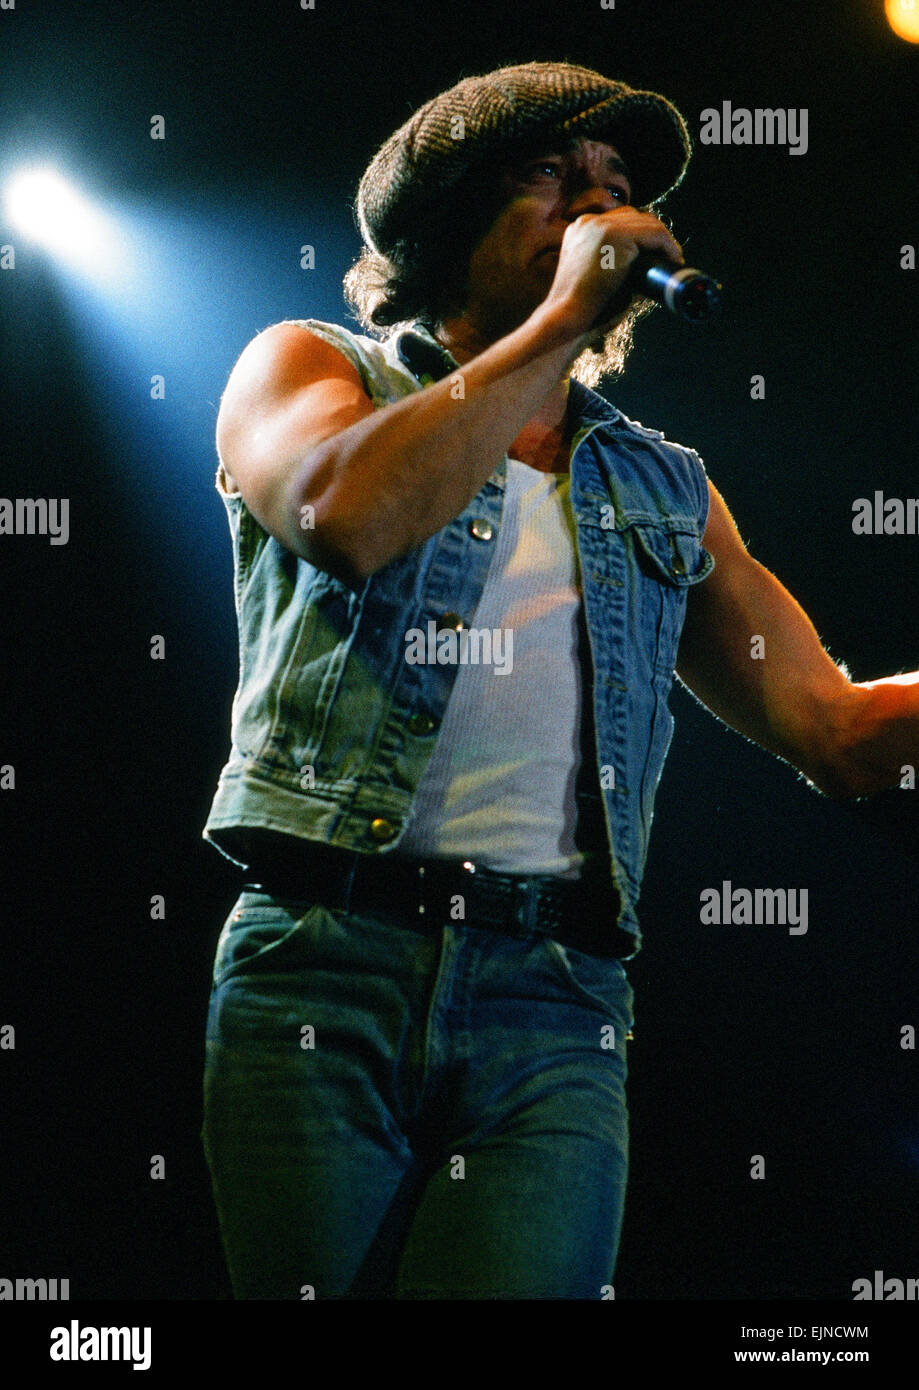 AC/DC in concert at Wembley Arena, singer Brian Johnson on stage. 16th January 1986. Stock Photo